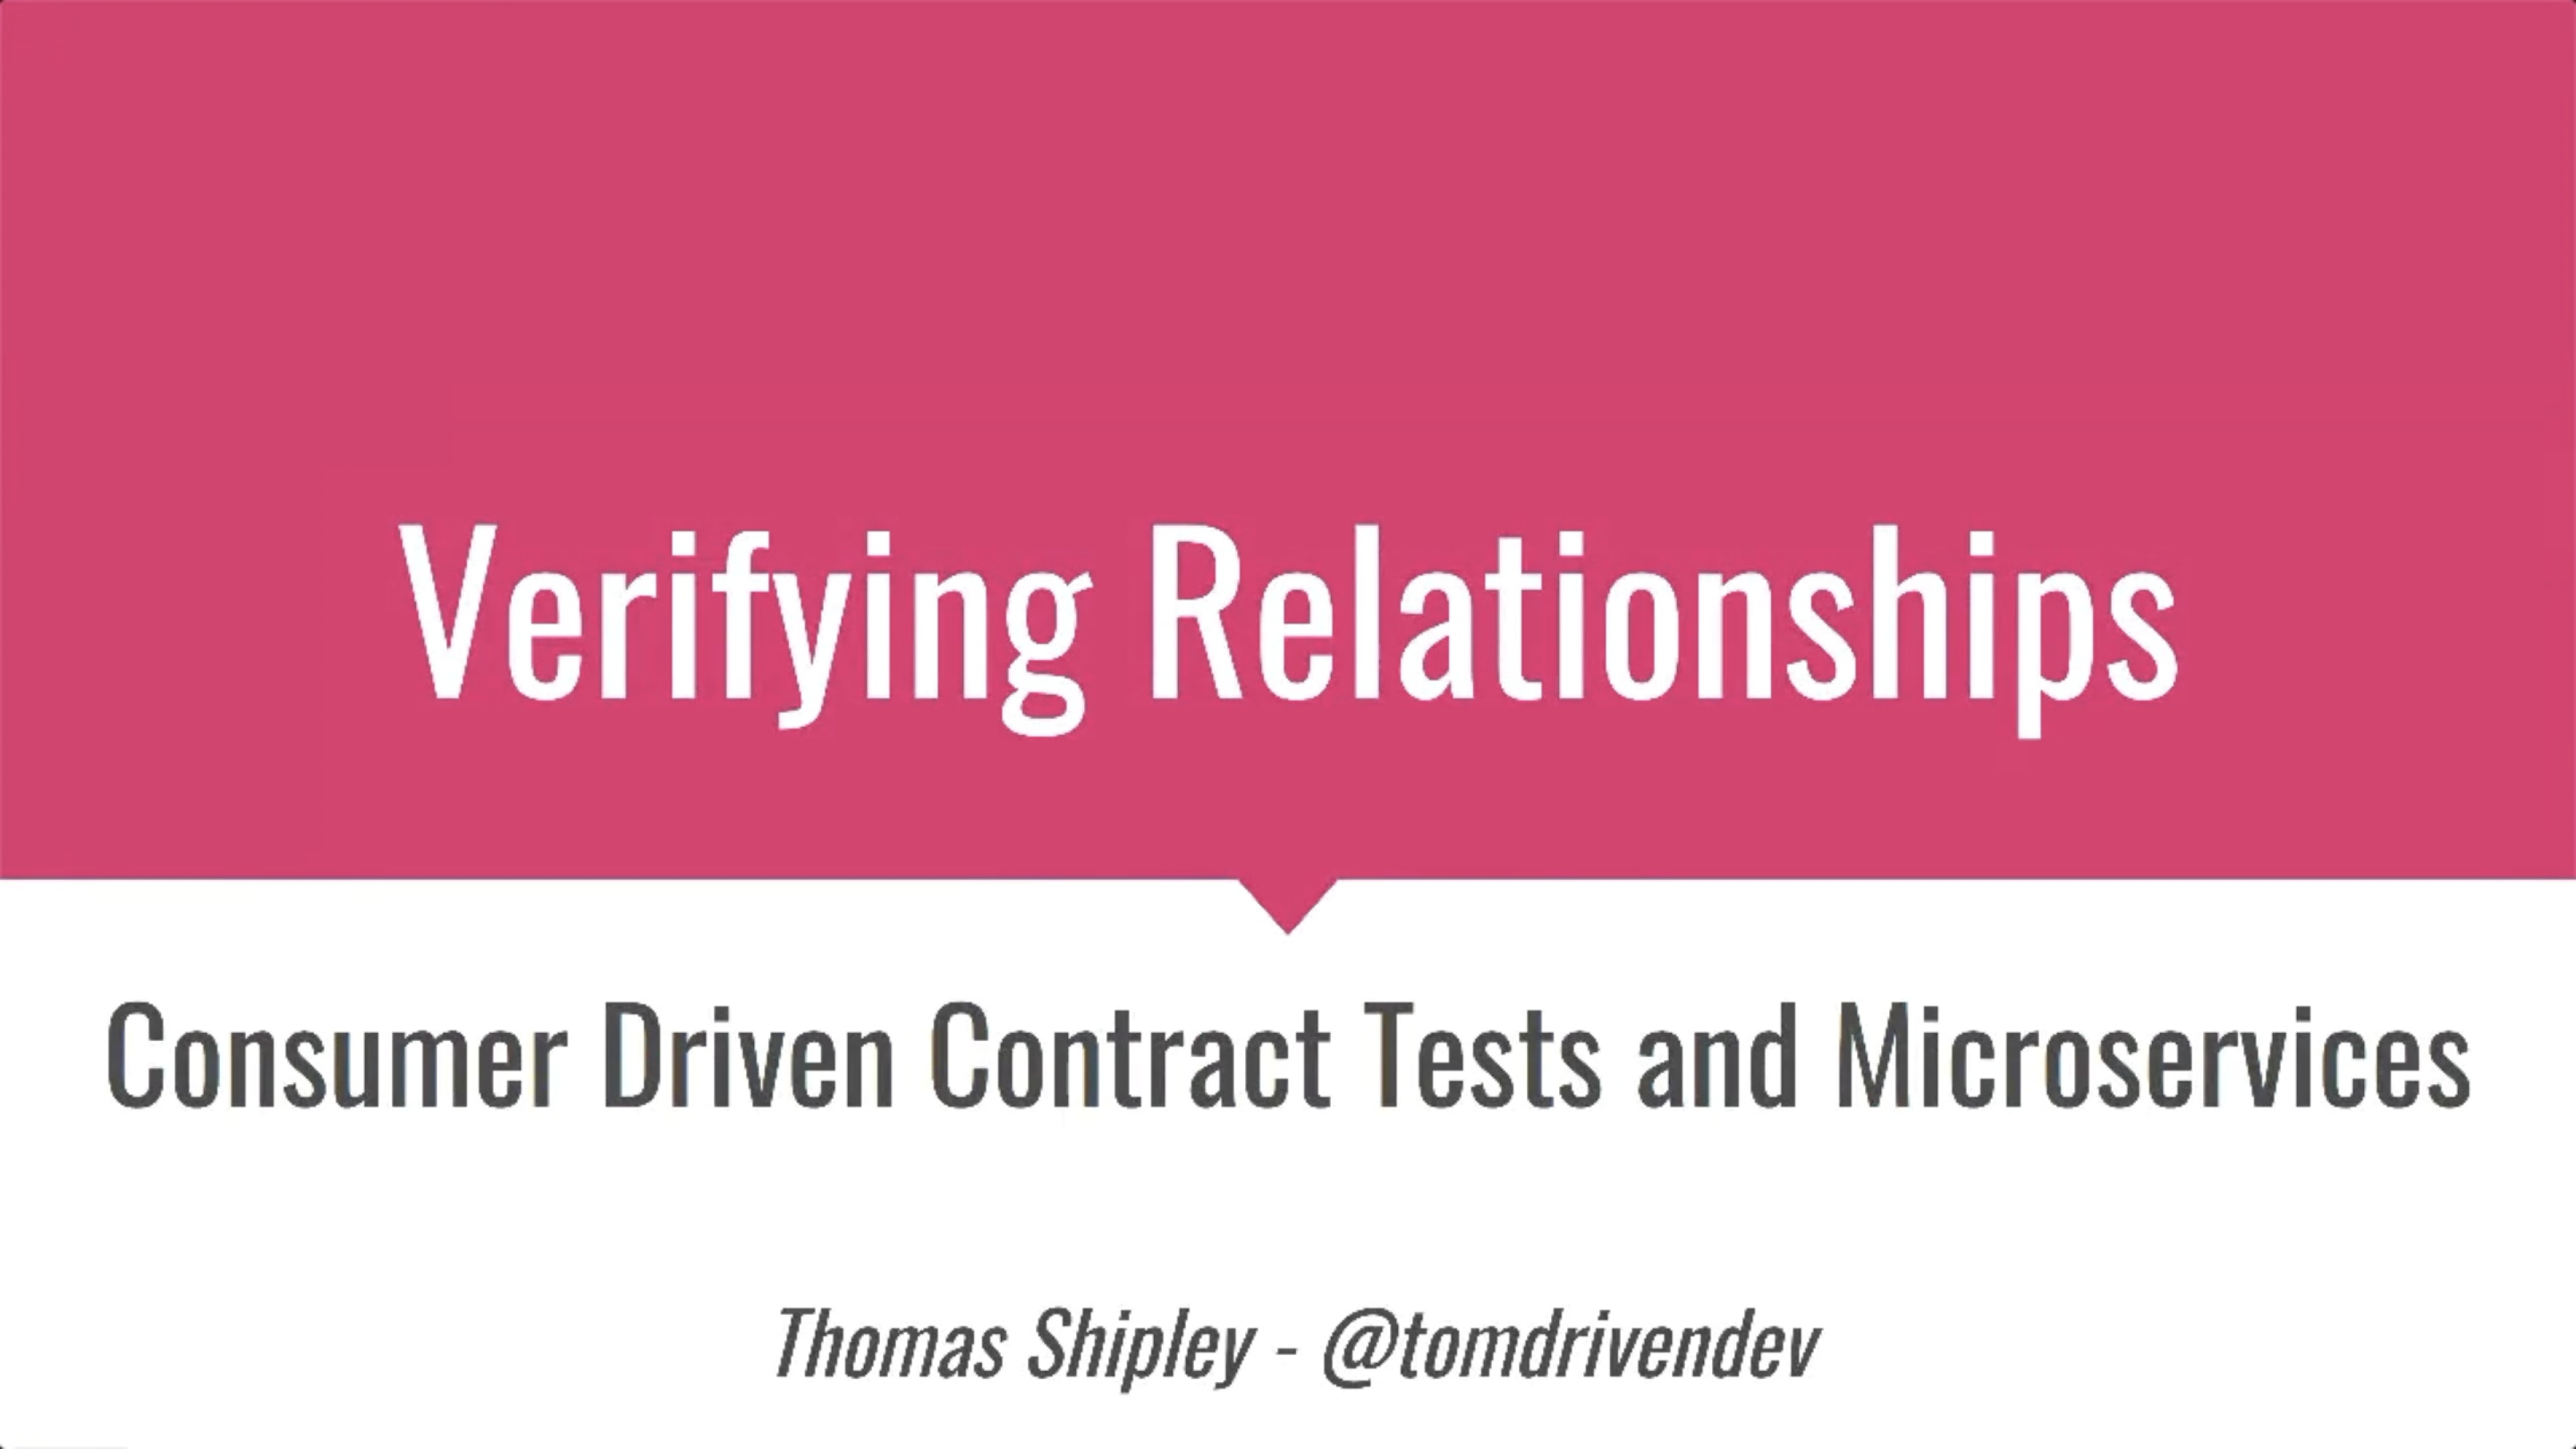 Verifying Relationships: Consumer-Driven Contract Tests and Microservices